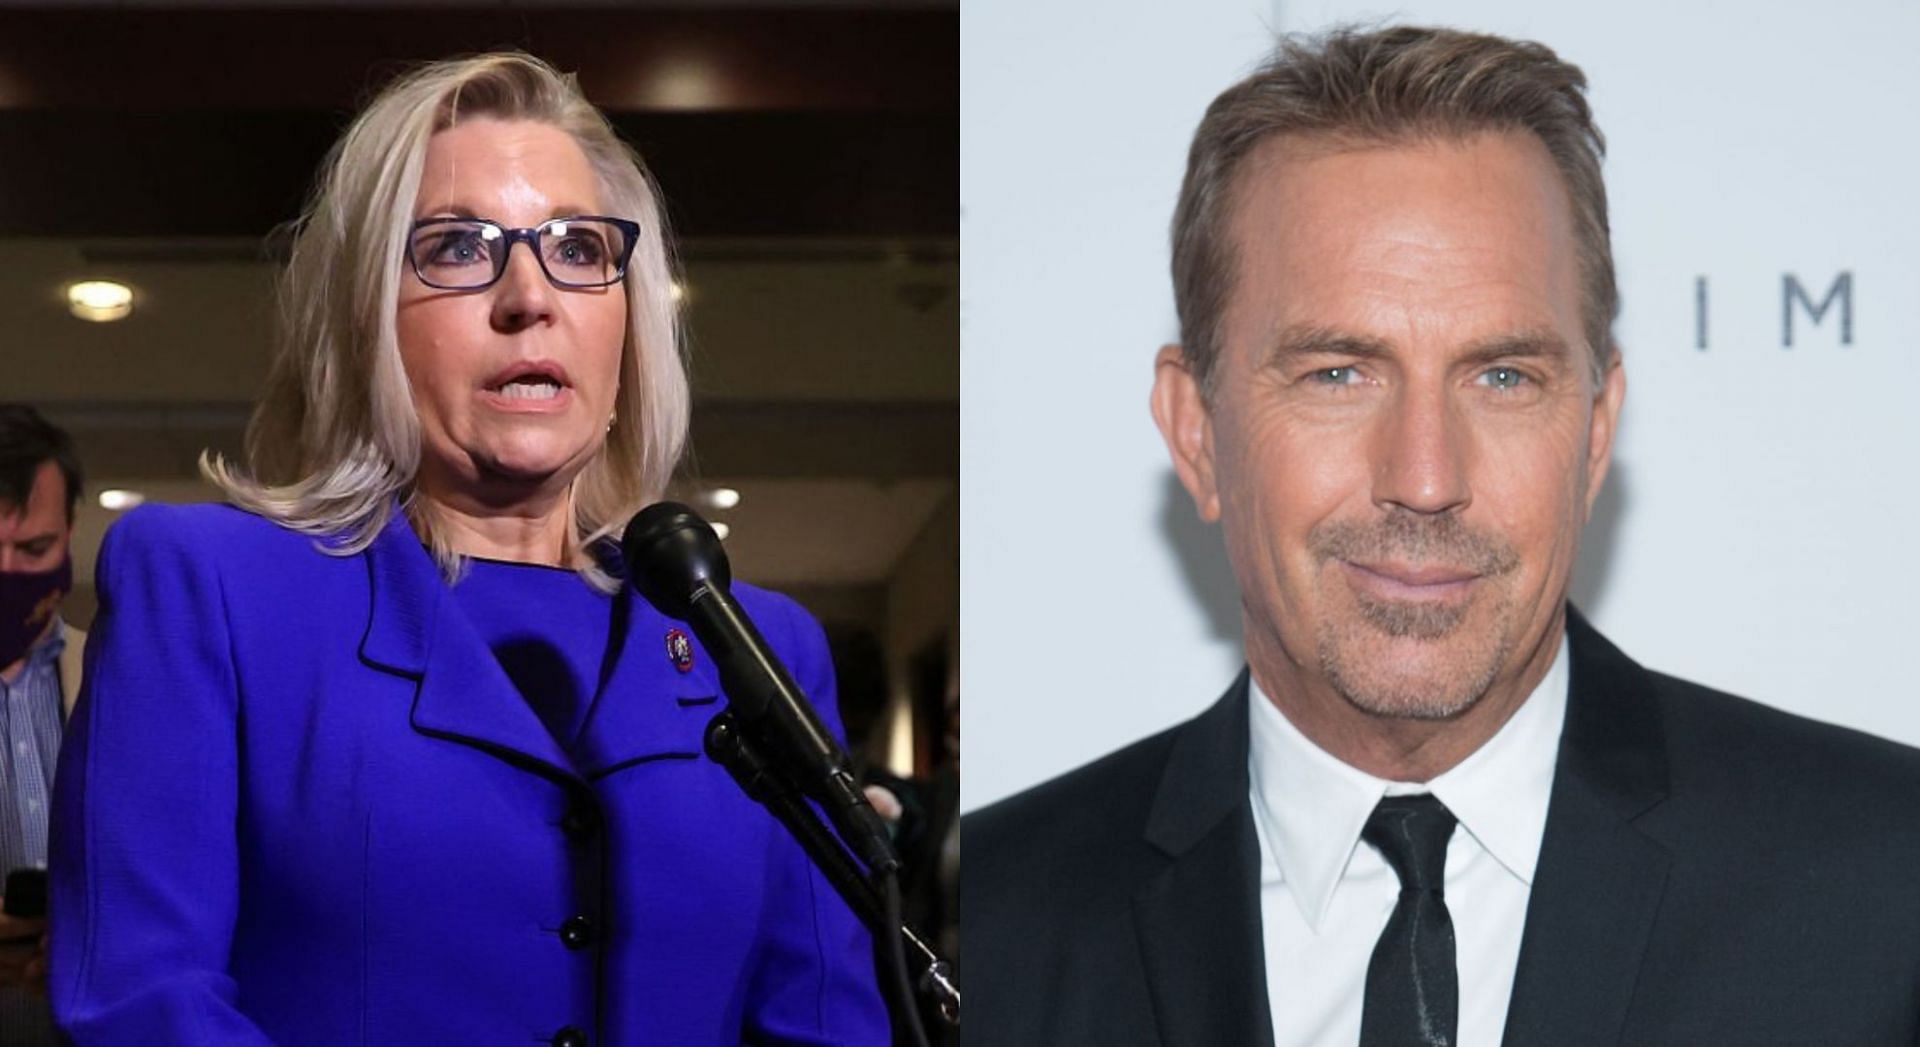 Kevin Costner recently endorsed Liz Cheney by wearing a pro-Cheney t-shirt (Image via Getty Images)